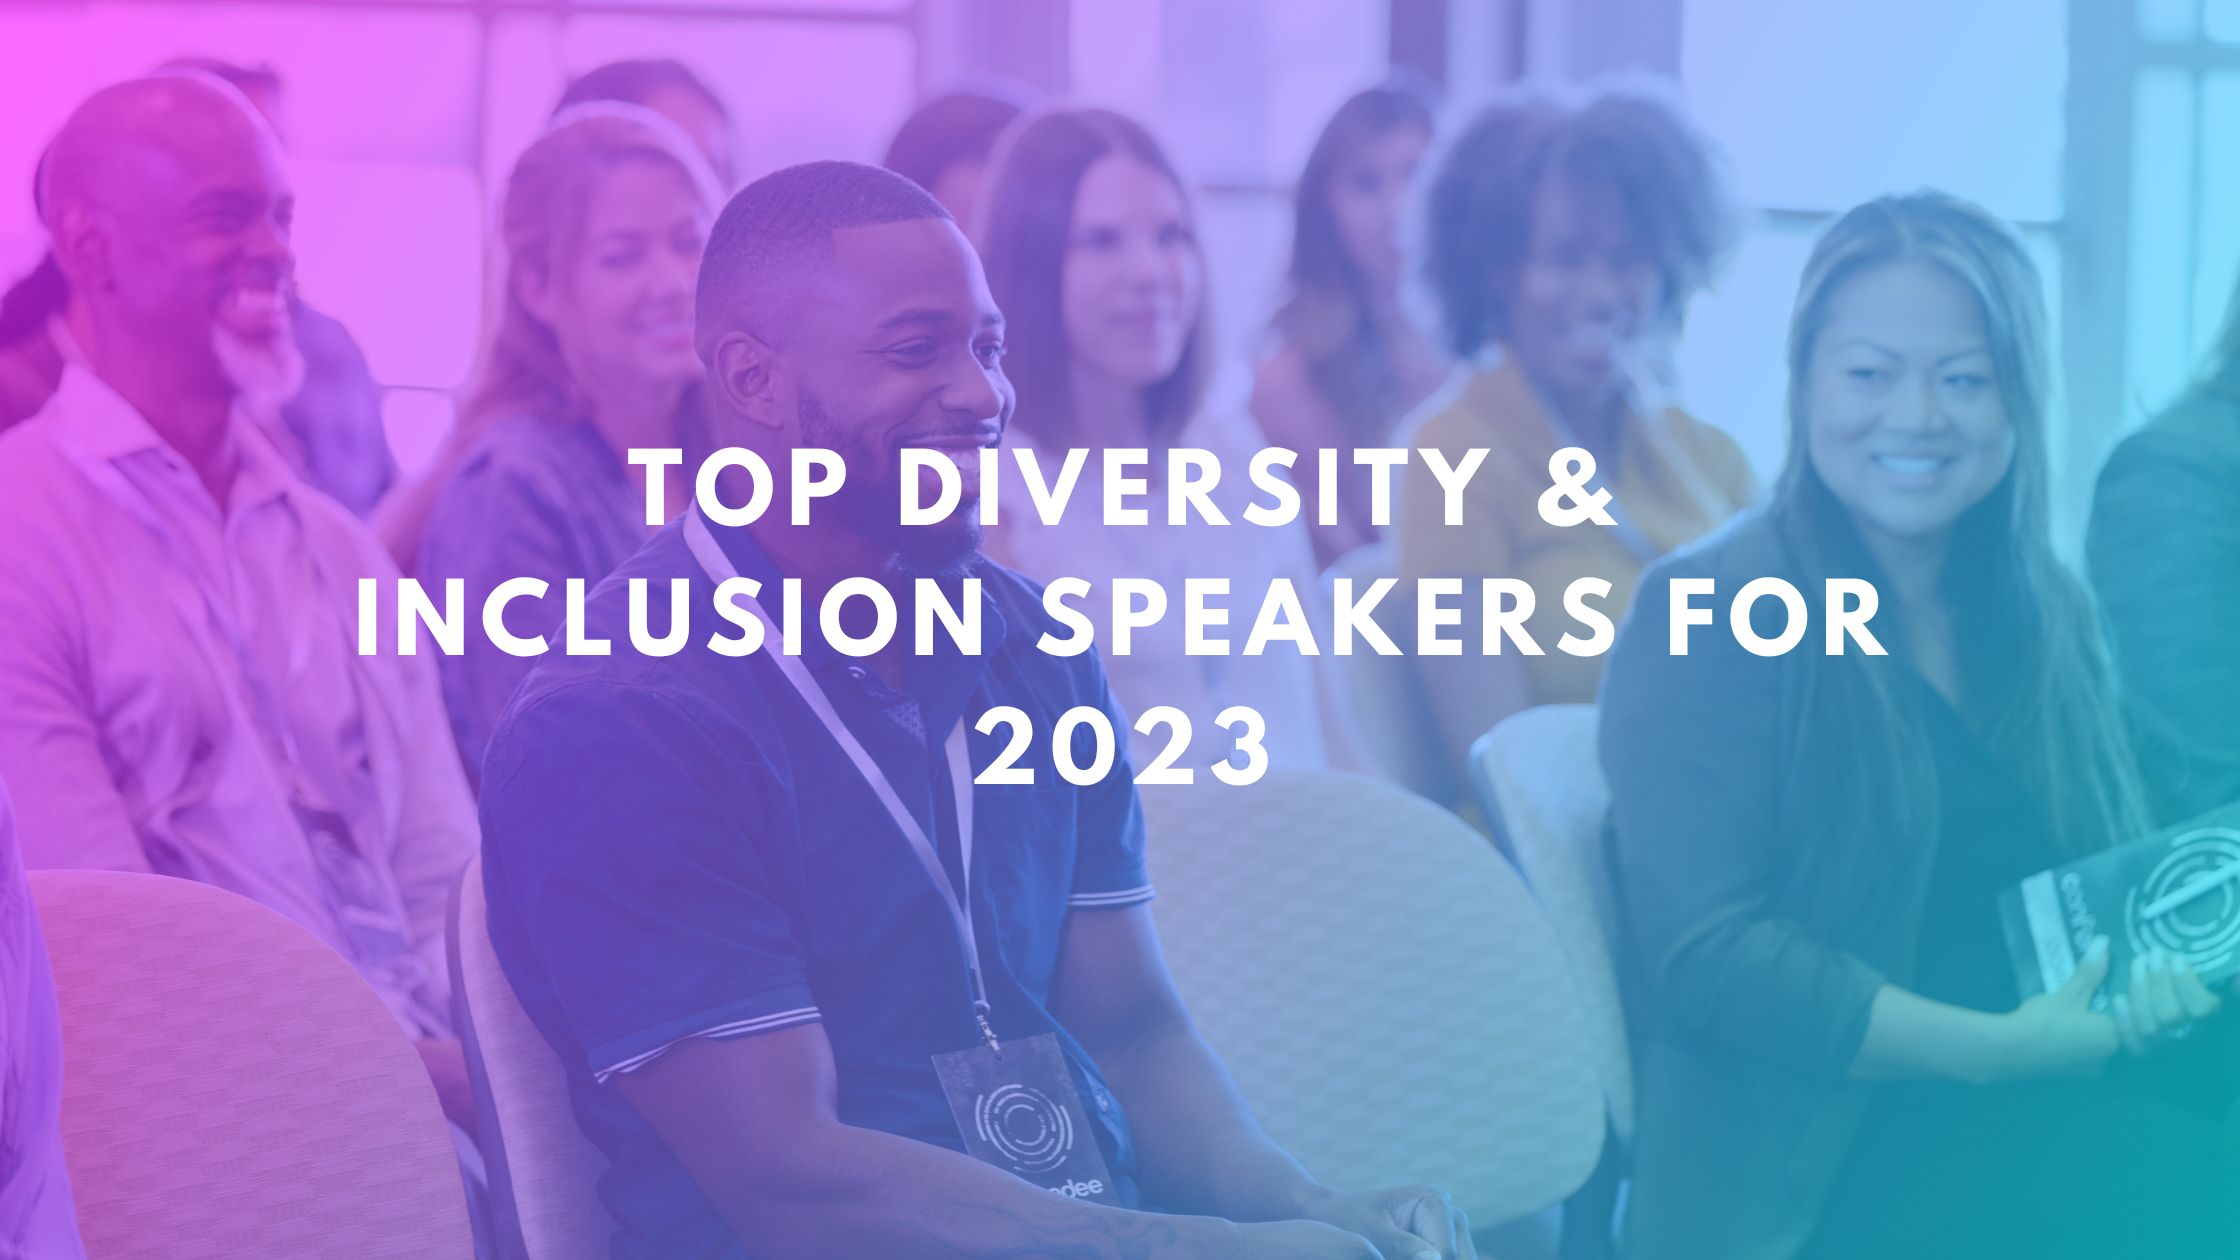 Top Diversity & Inclusion Speakers for 2023